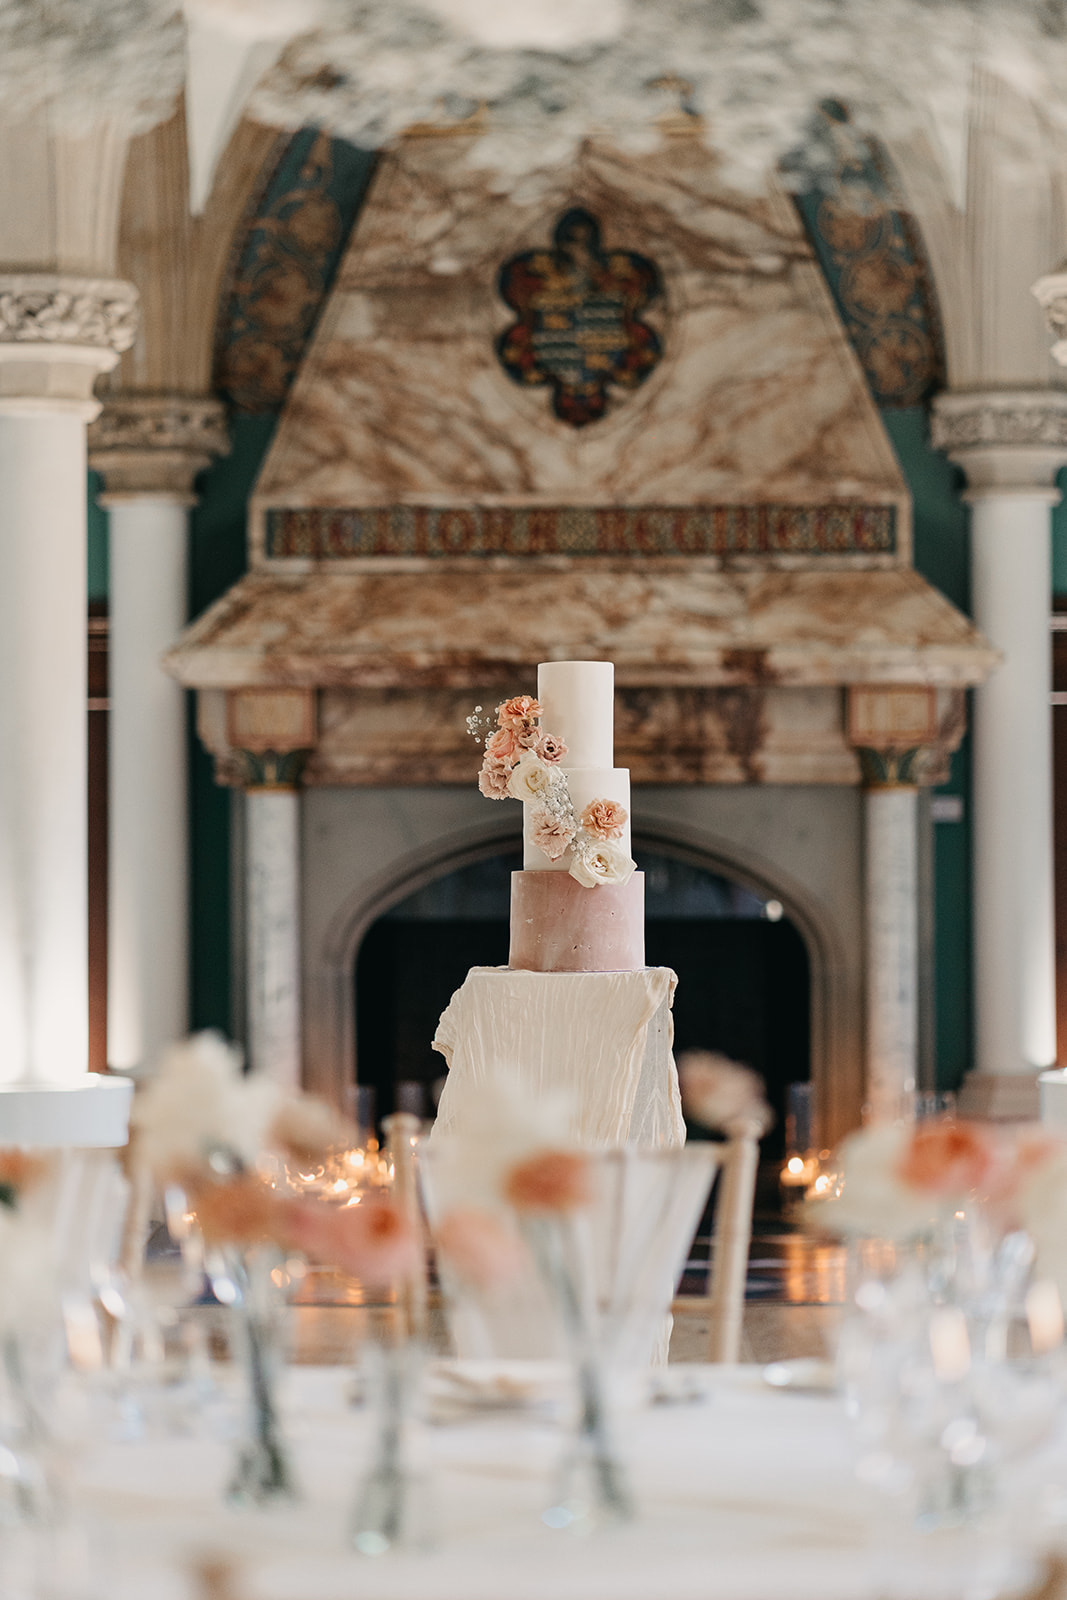 Intimate, micro wedding | Wotton House | Modern cake design with fresh florals | Louise Hayes Cake Design